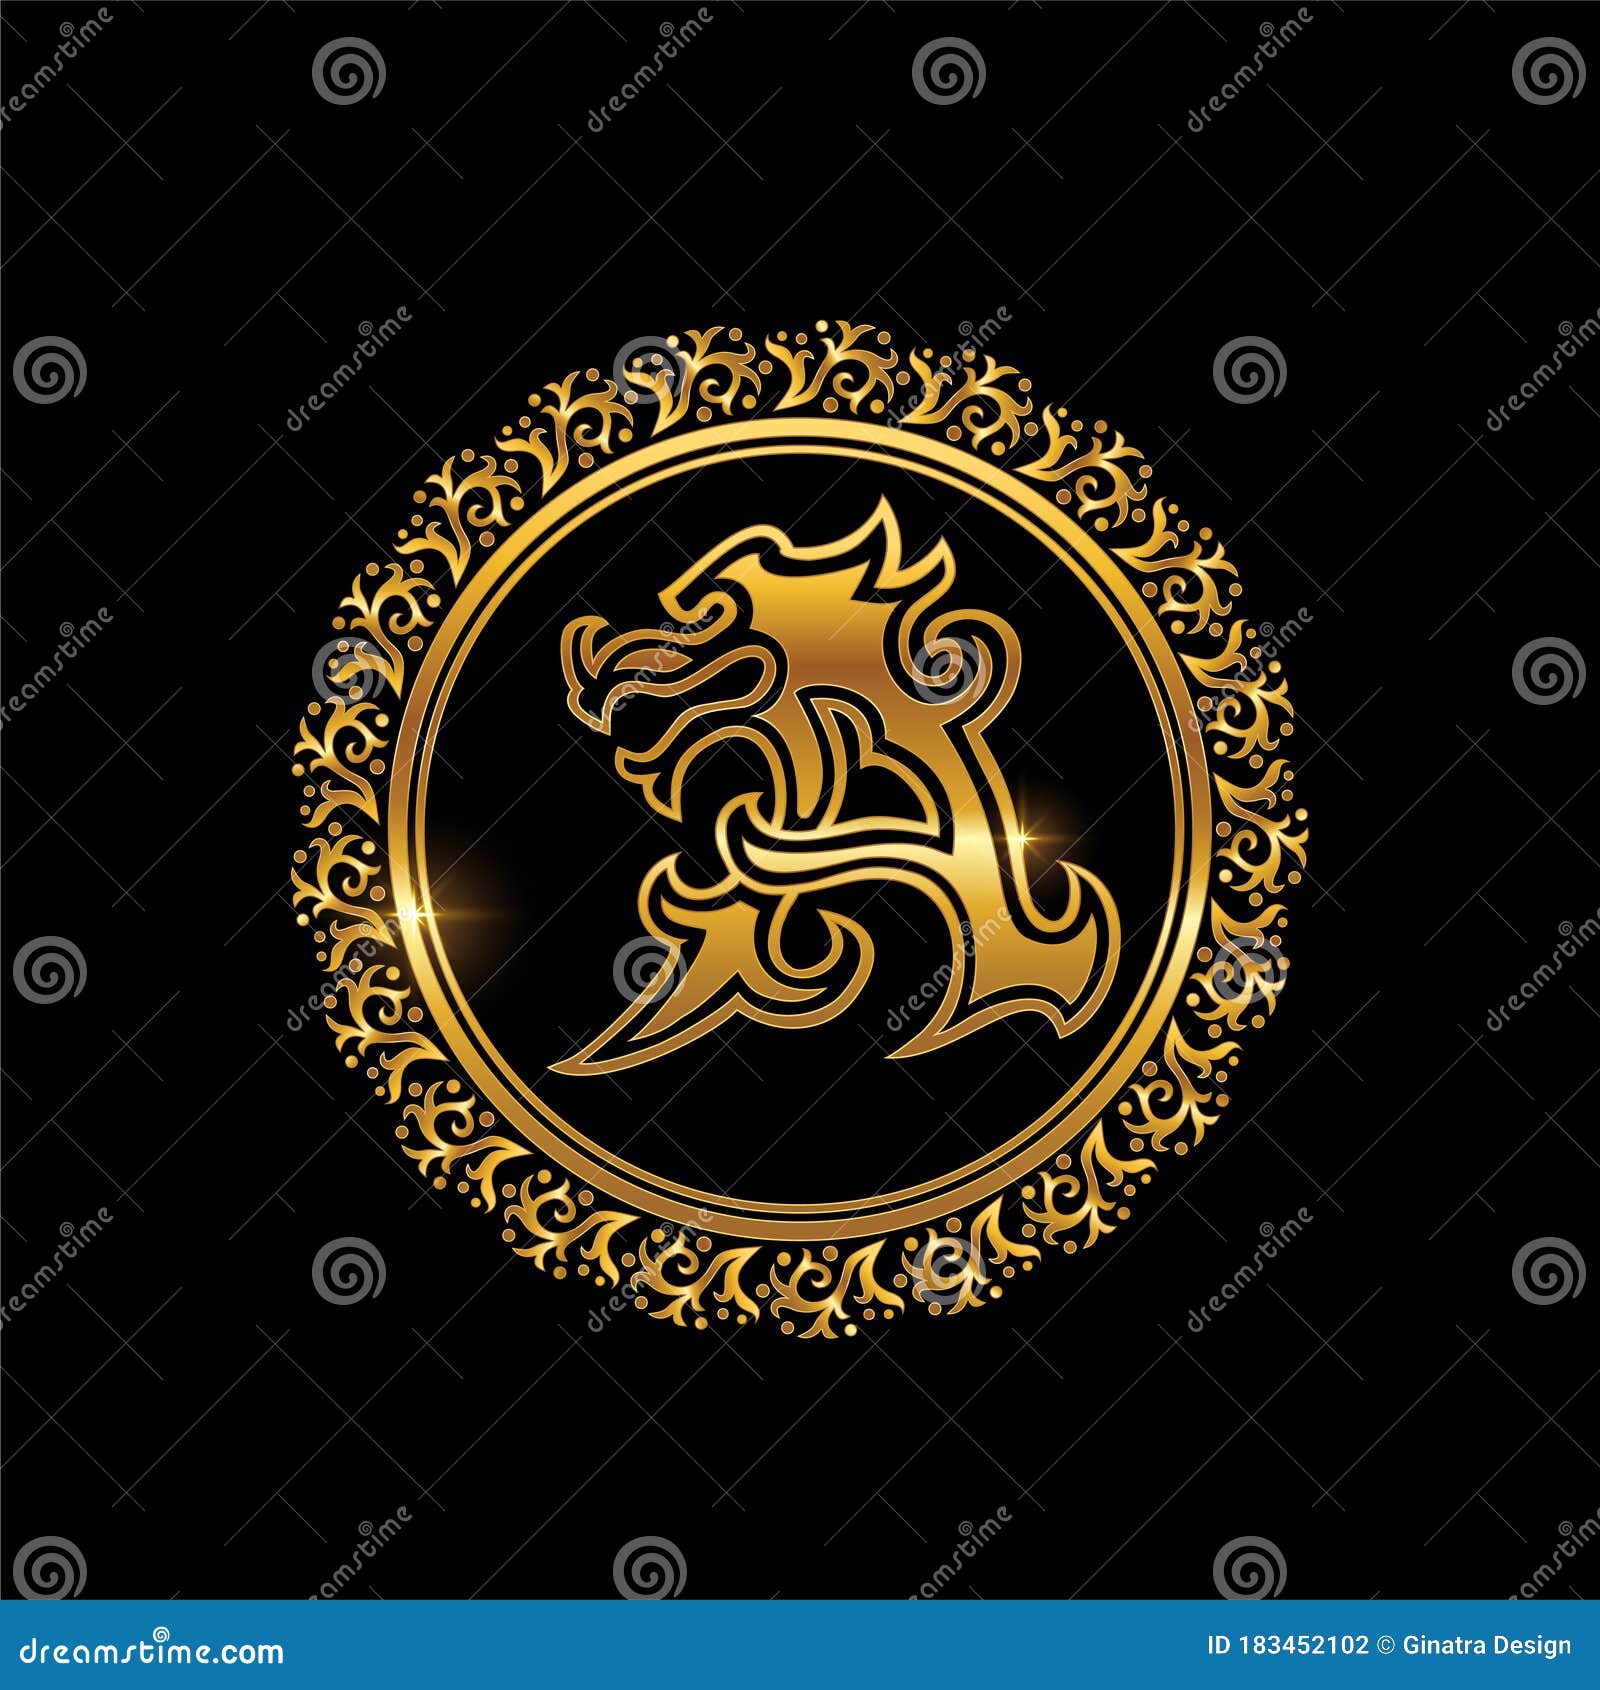 Golden Dragon Letter A Initial Logo Stock Vector Illustration Of Identity Background